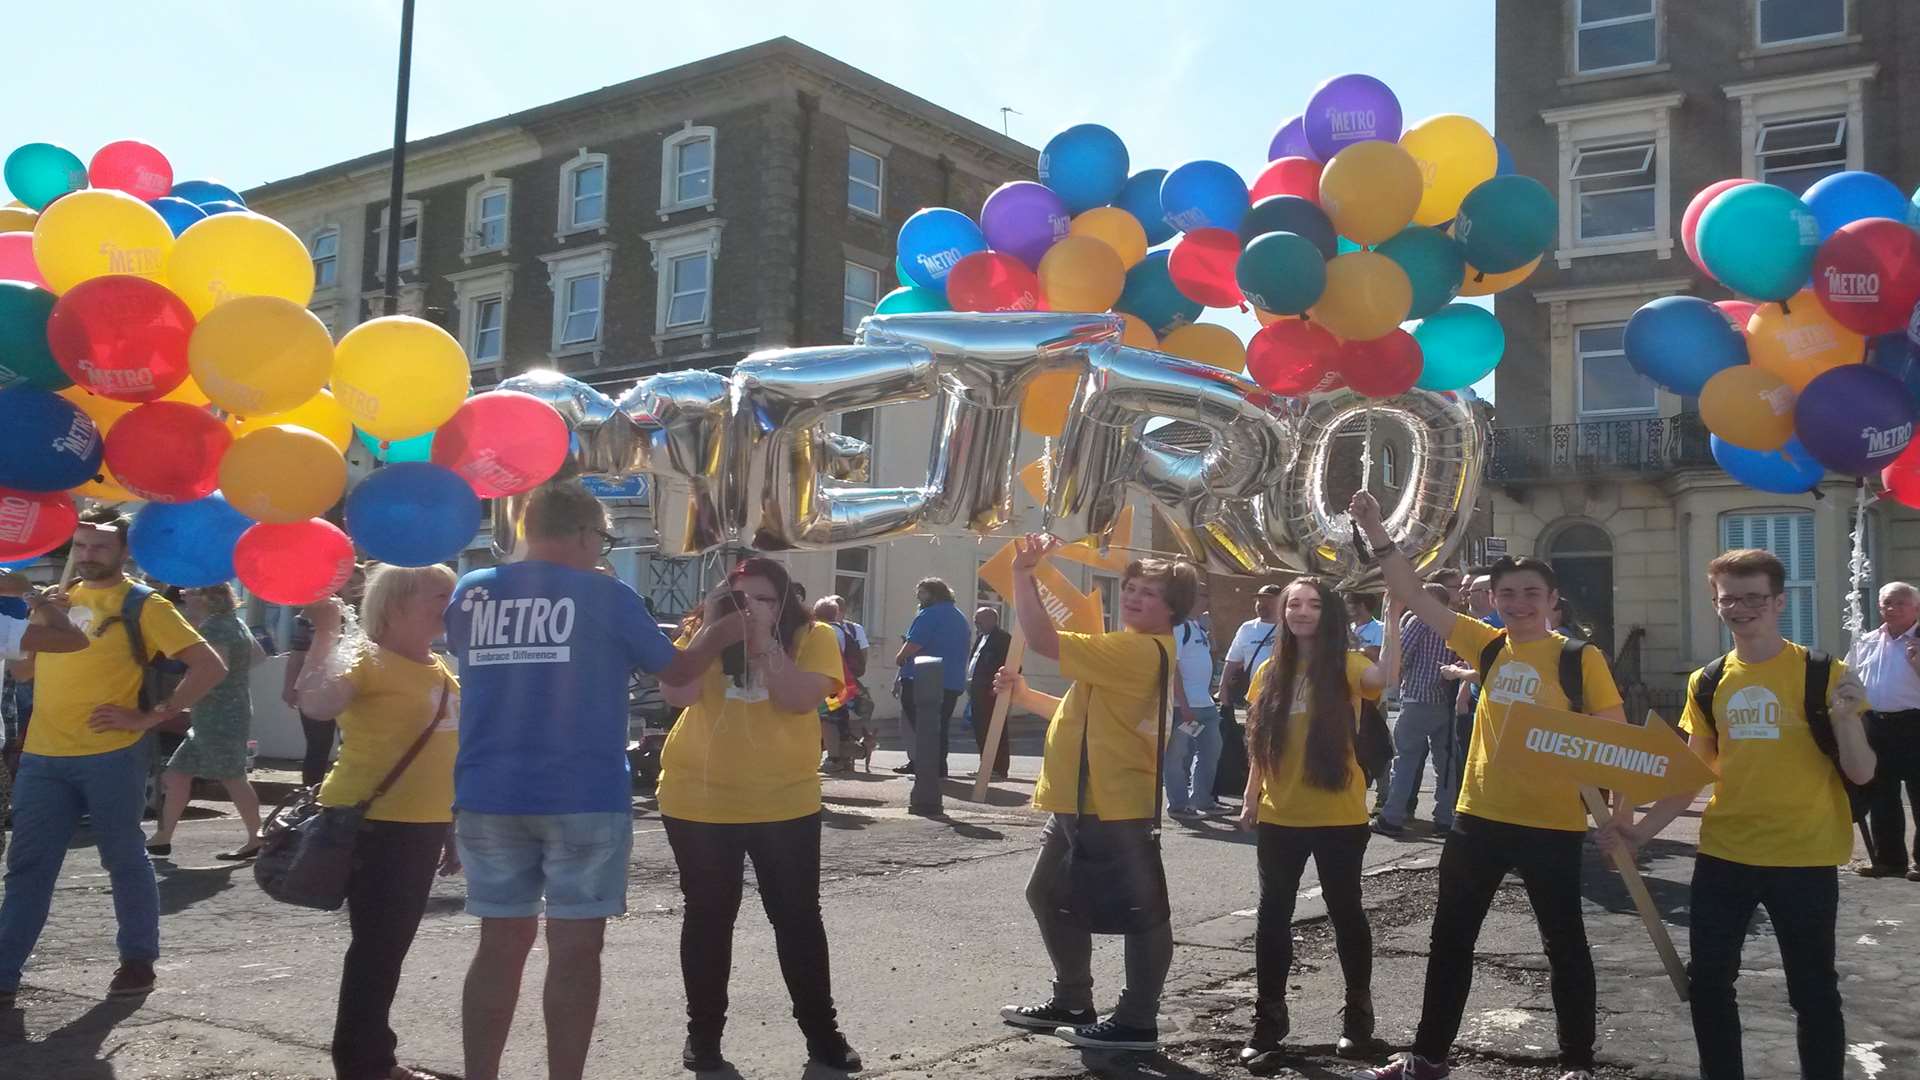 Kent Pride in Margate attracts thousands to support LGBT community